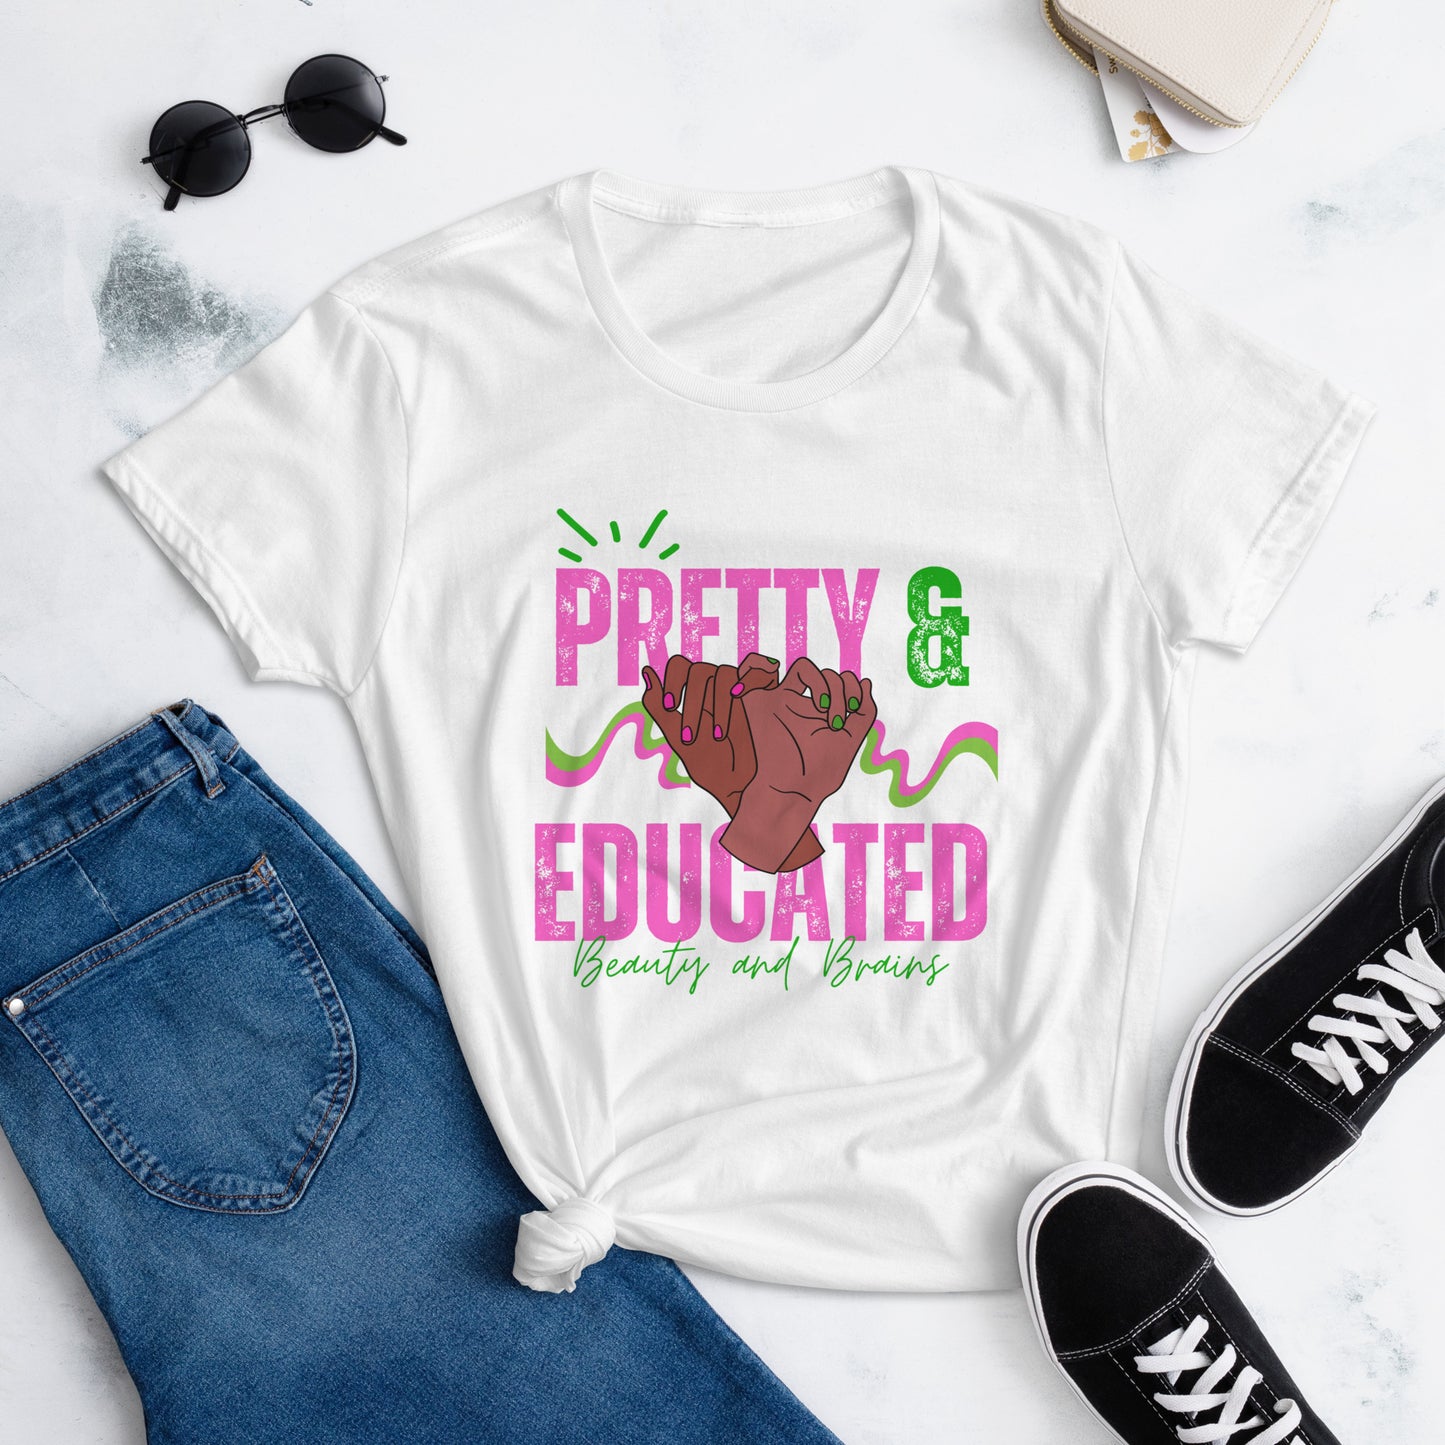 Women's Fitted Pretty & Educated Tee